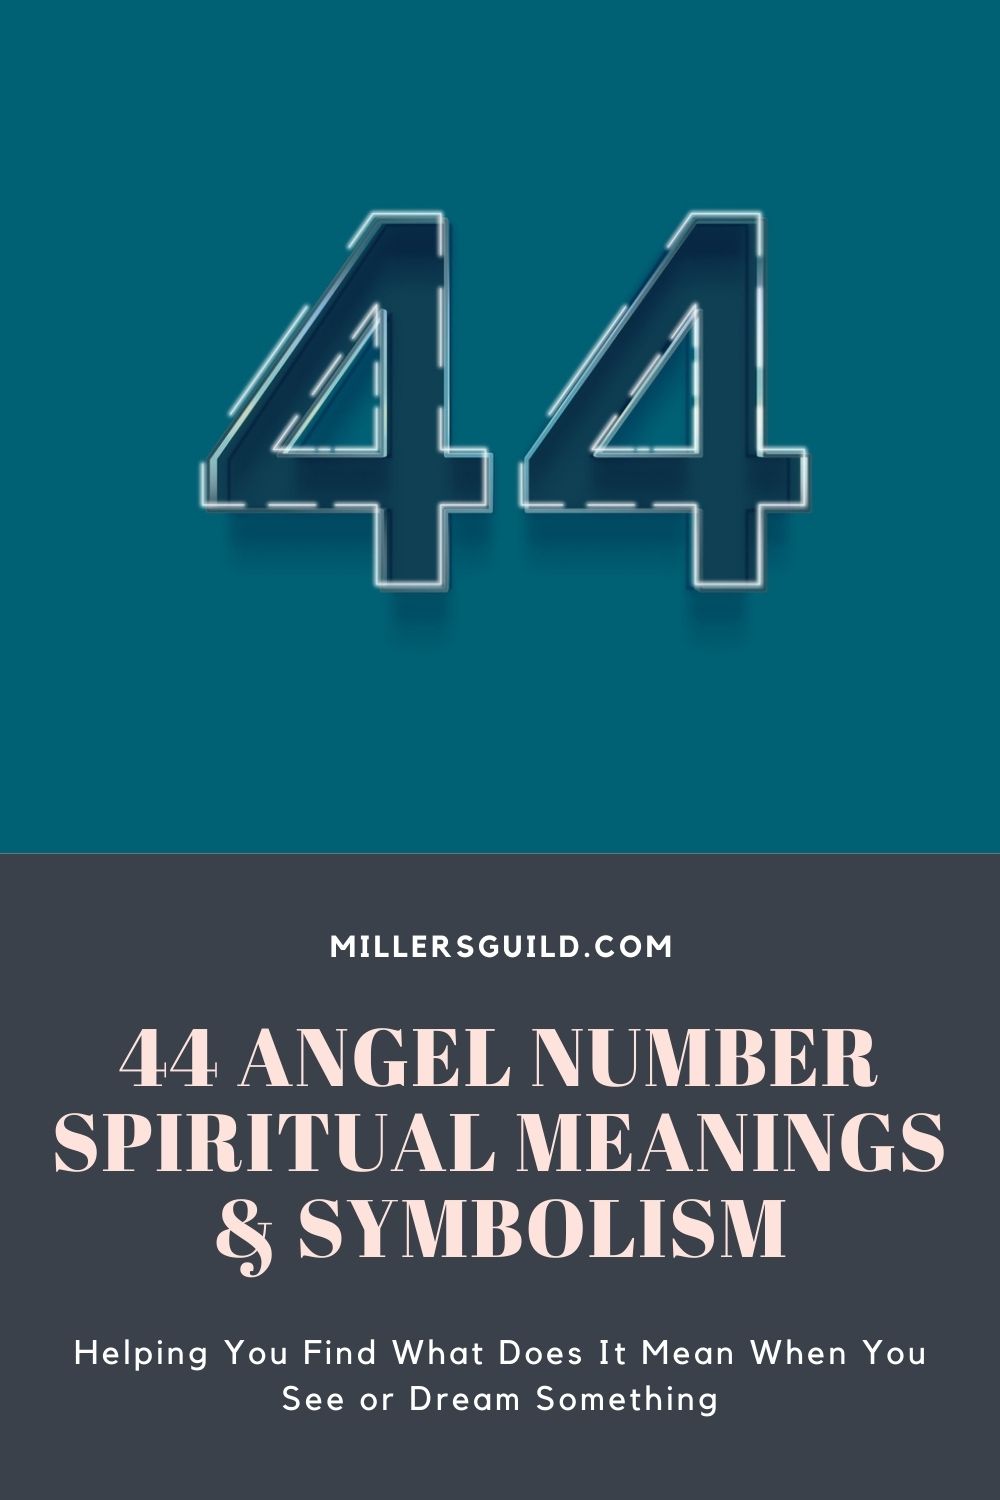 44 Angel Number Spiritual Meanings & Symbolism 2